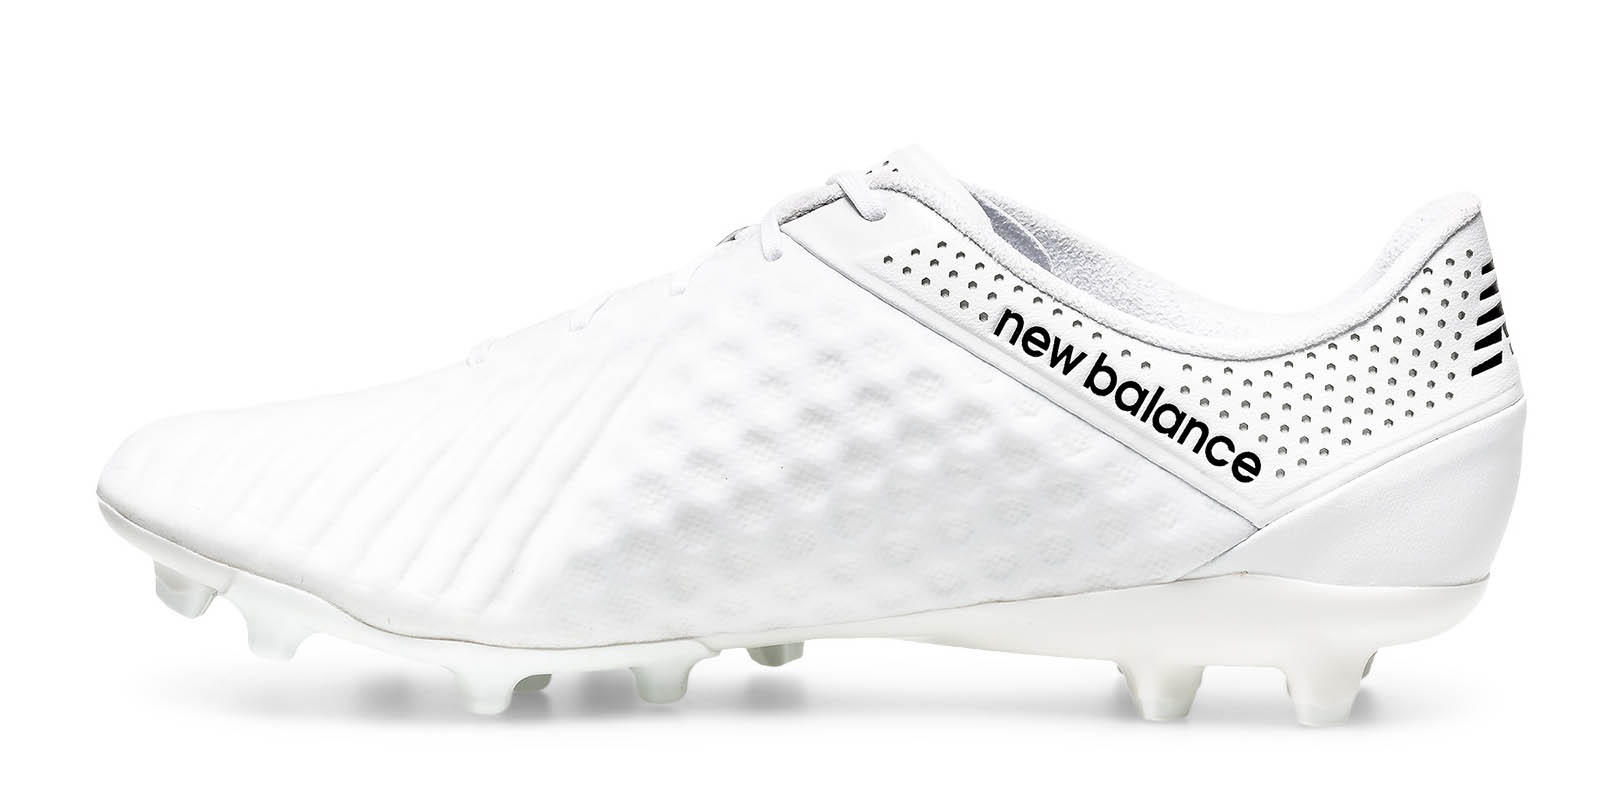 Blackout and Whiteout New Balance Furon and Visaro Boots Released ...